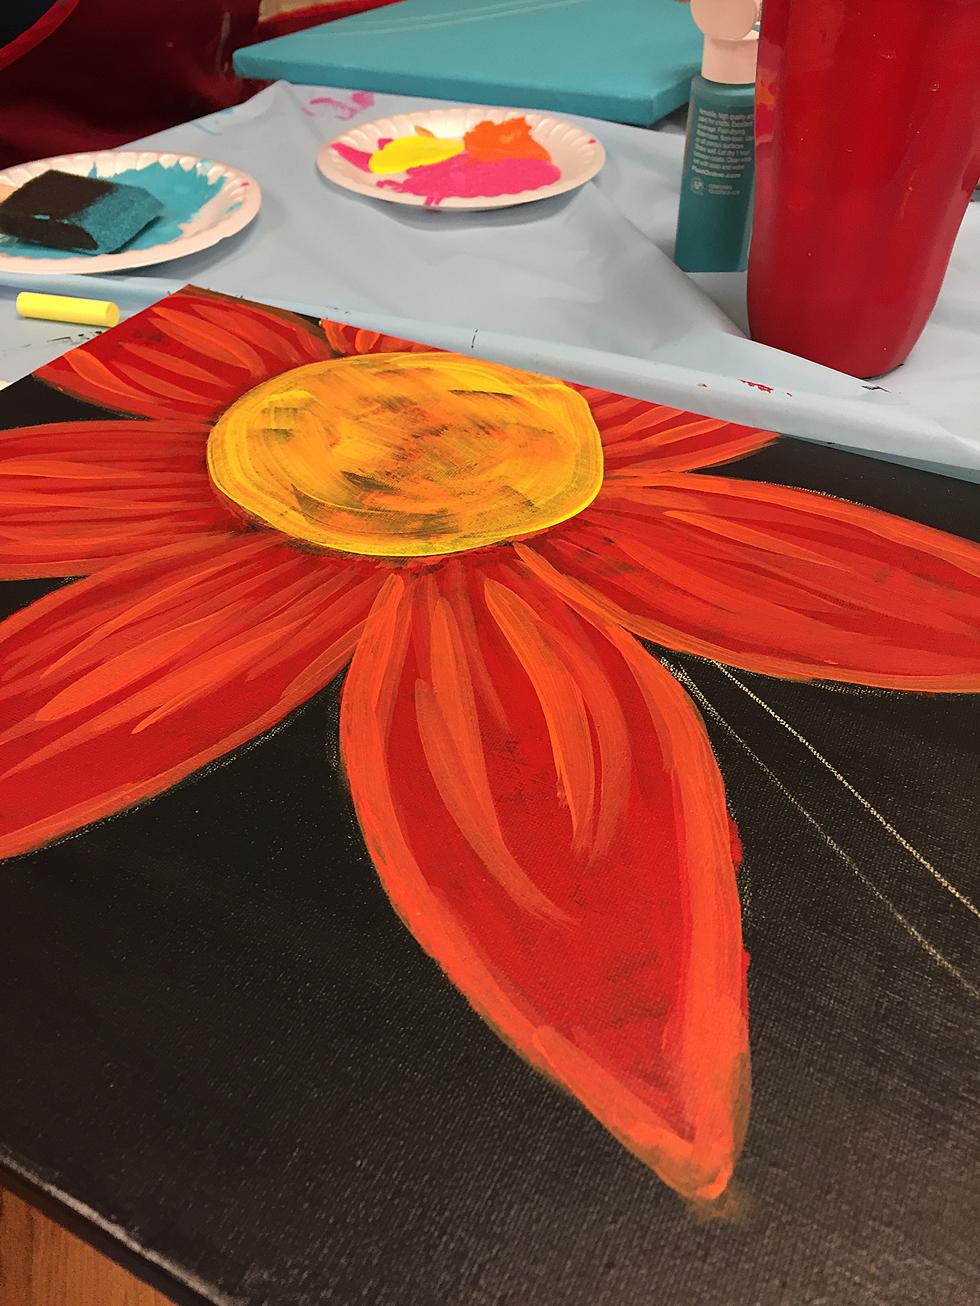 Painting Party for a Purpose [PHOTOS]